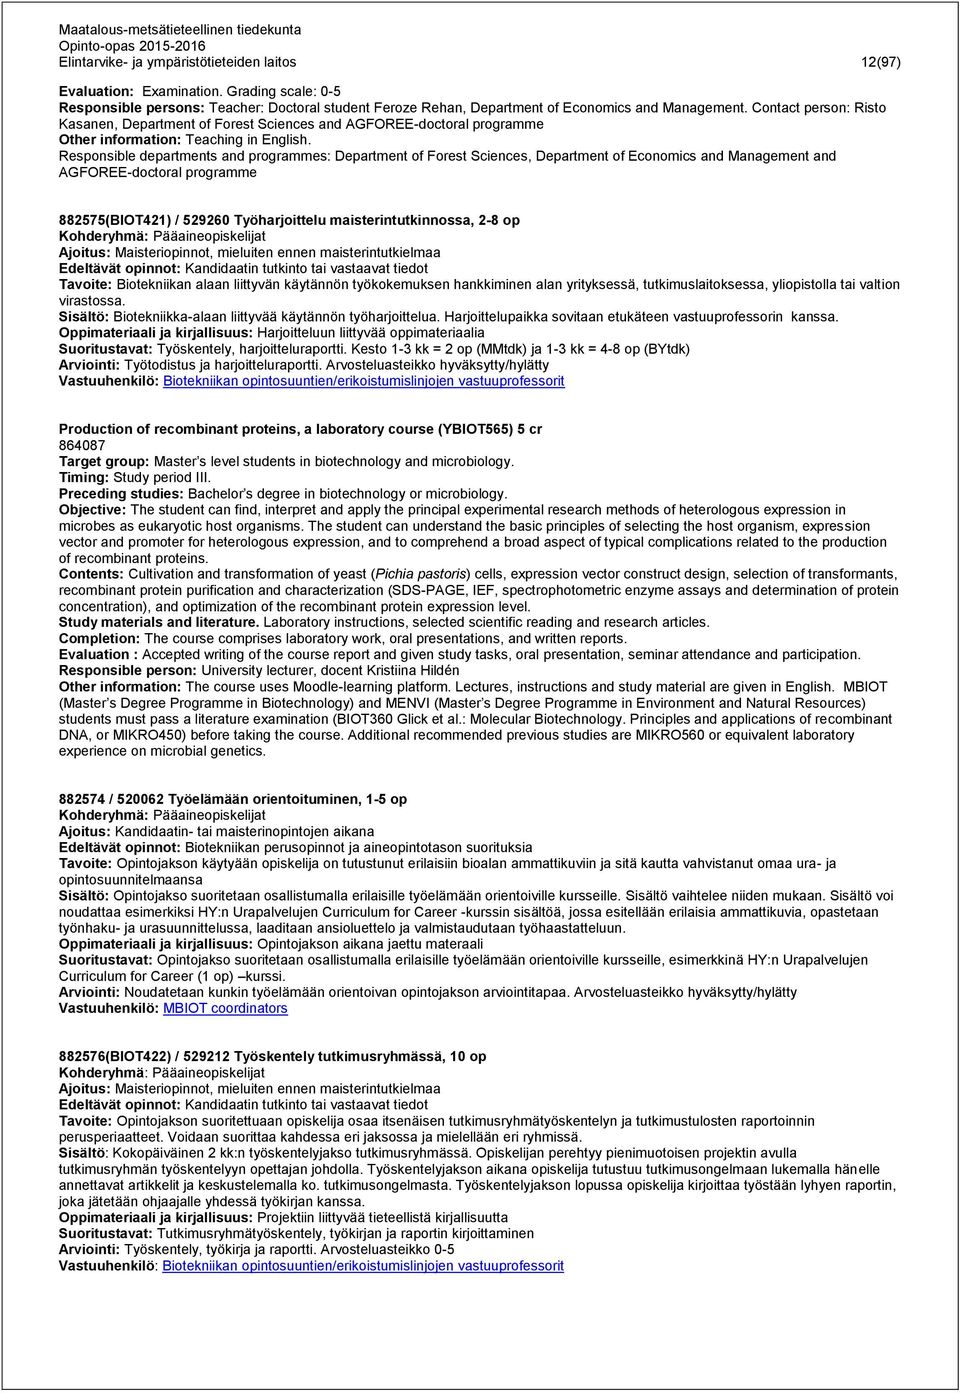 Responsible departments and programmes: Department of Forest Sciences, Department of Economics and Management and AGFOREE-doctoral programme 882575(BIOT421) / 529260 Työharjoittelu